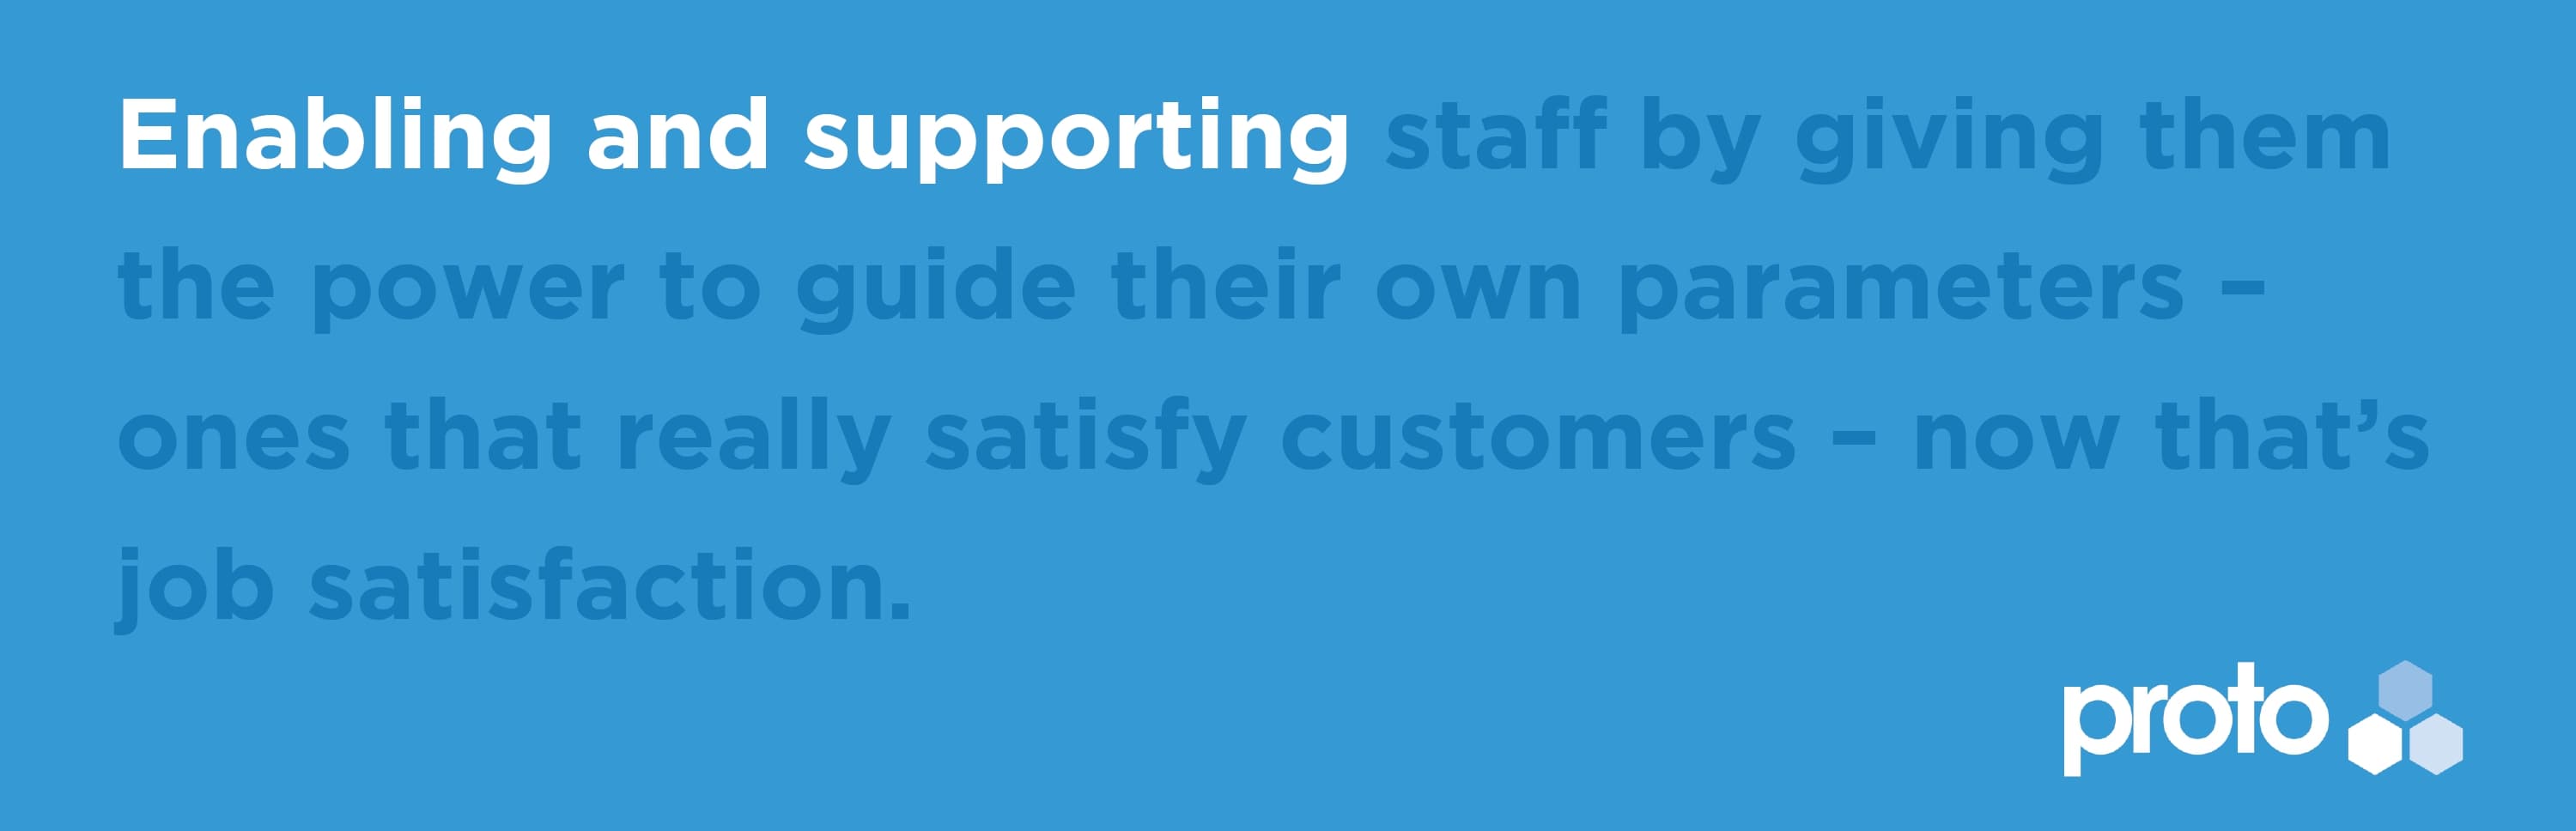 Enabling and supporting staff by giving them the power to guide their own parameters - ones that really satisfy customers - now that's job satisfaction.